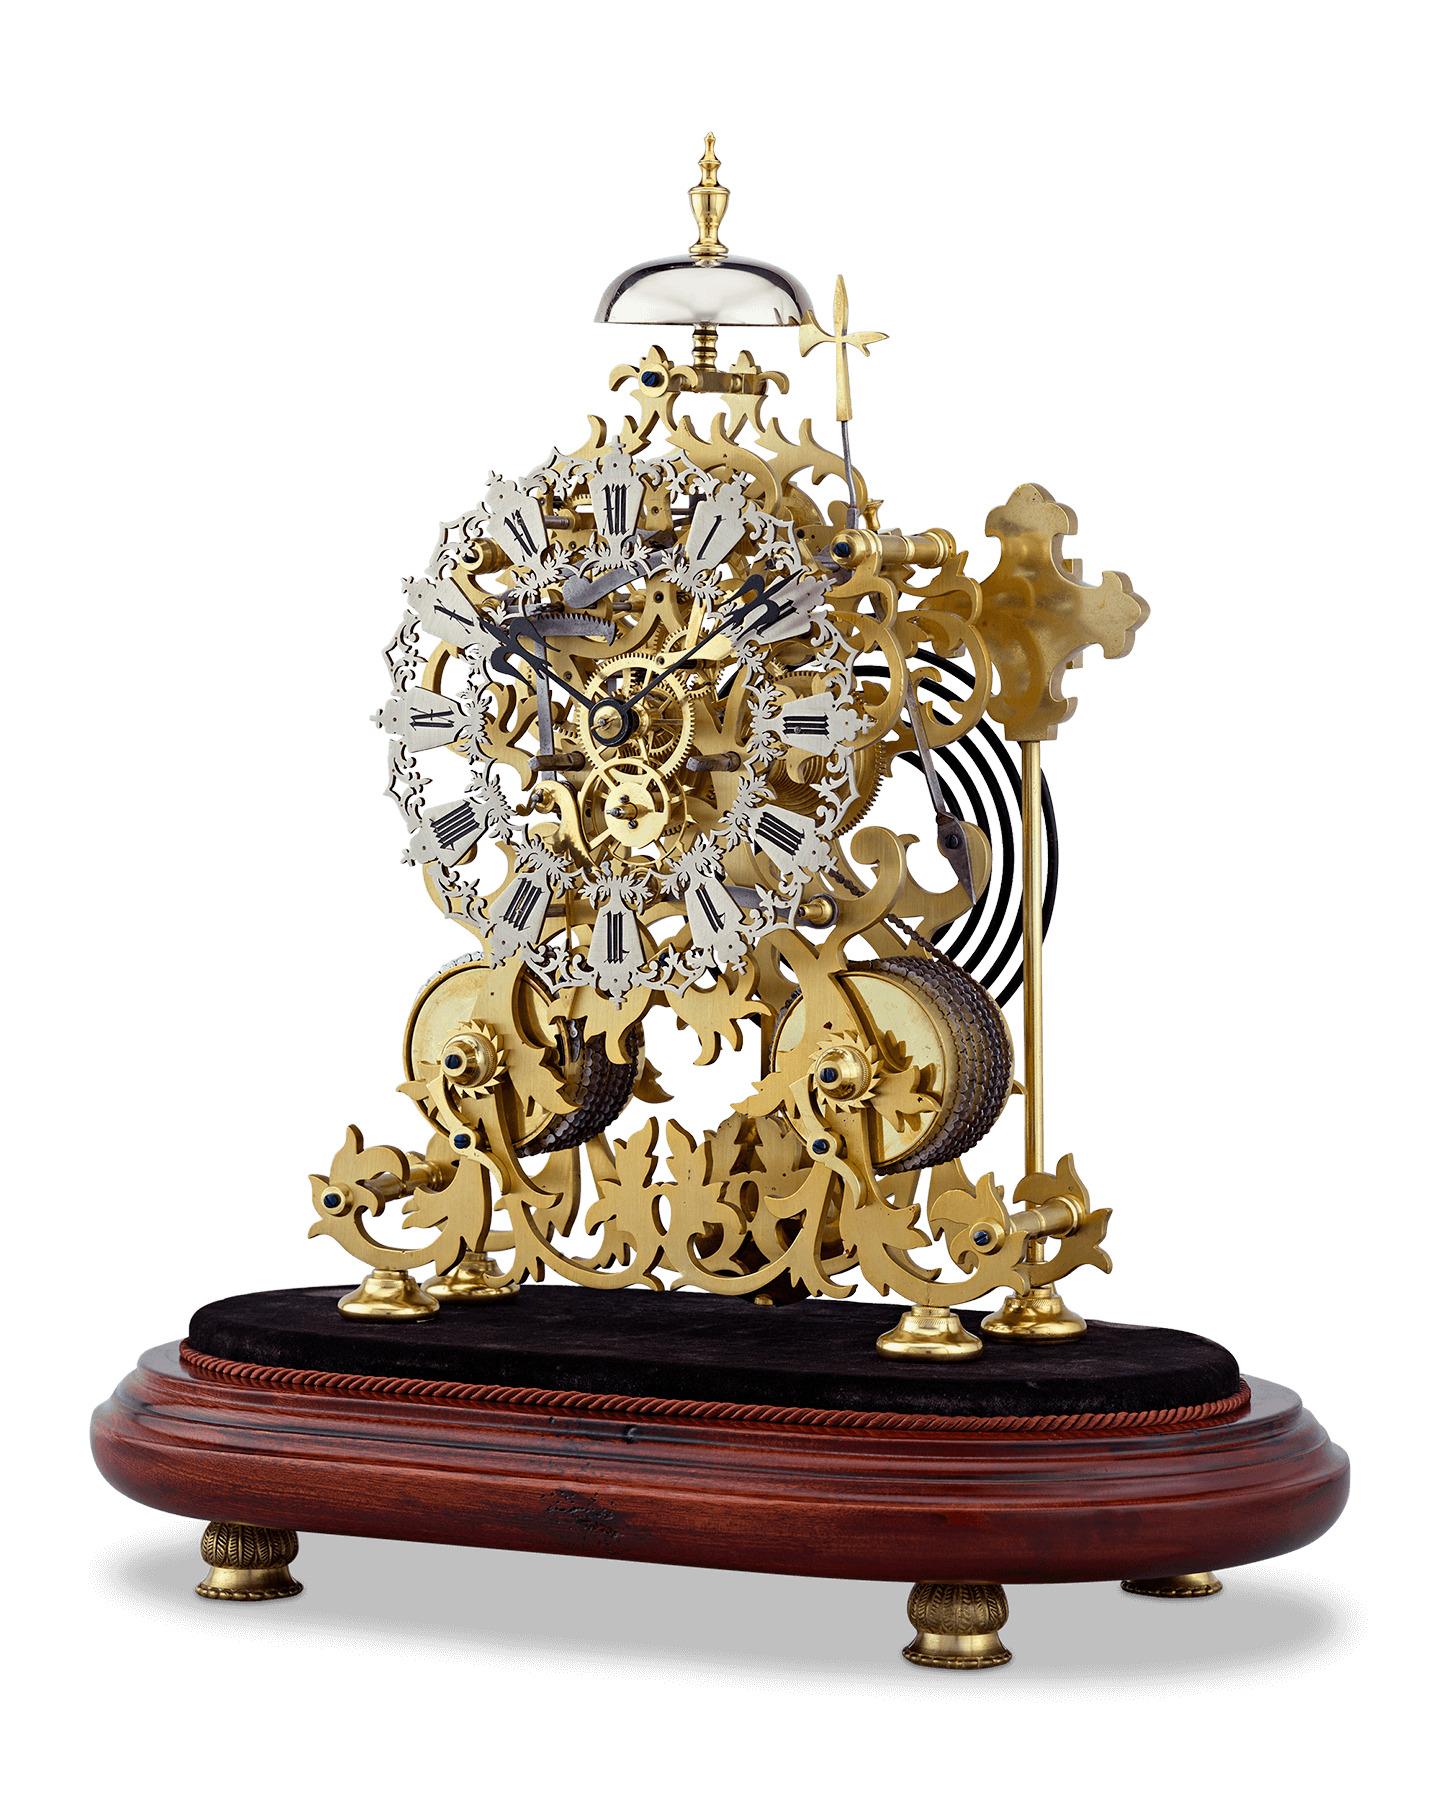 This exceptional two-train English skeleton clock was crafted by the celebrated clockmakers J. Smith & Sons of Clerkenwell. The beautifully designed floral scroll frame incorporates an ivy motif, which perfectly complements the Gothic-style pierced